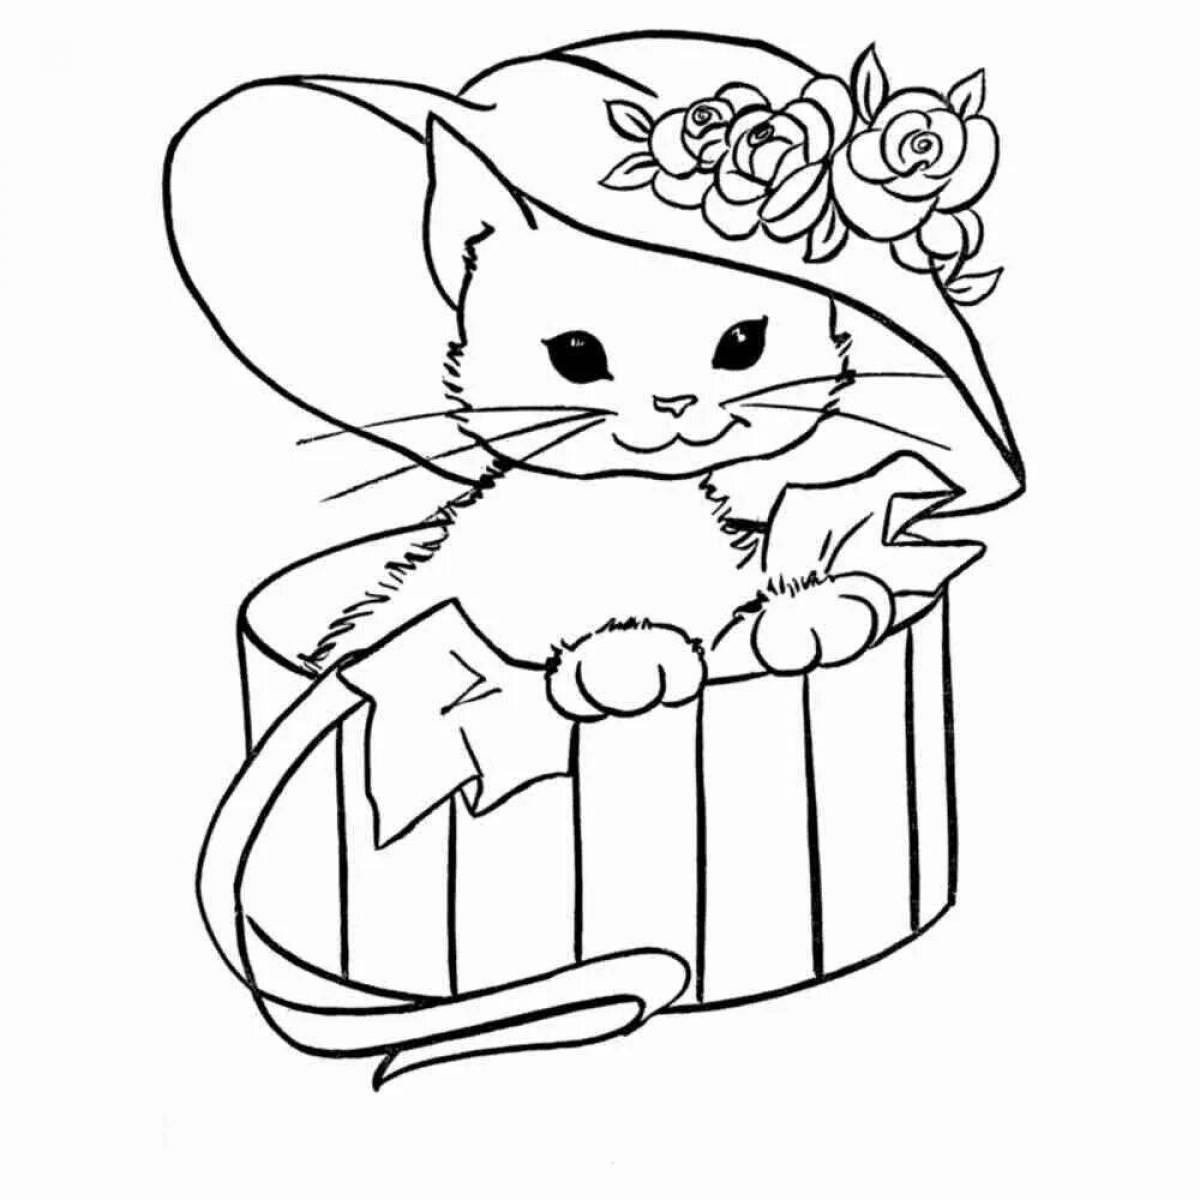 Cute pussy coloring book for kids